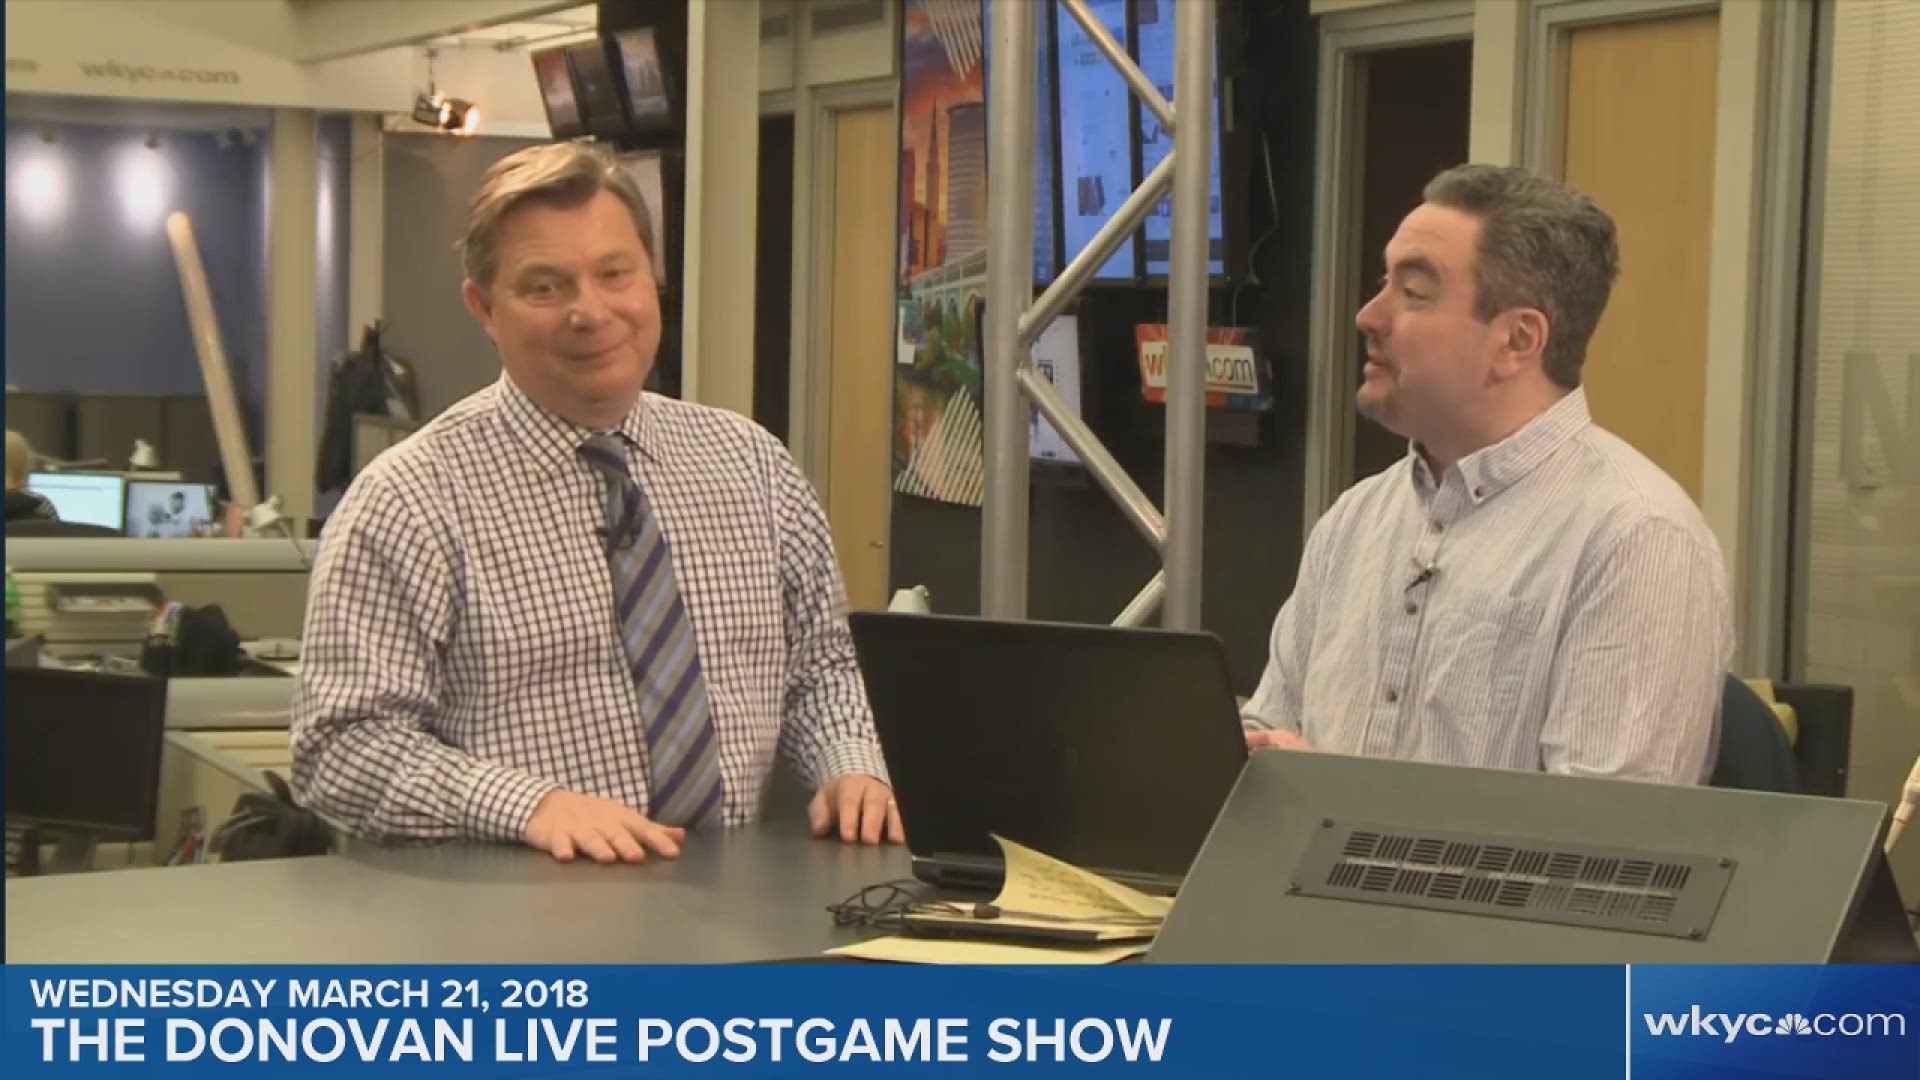 Jimmy is all-in on USC QB Sam Darnold for Cleveland Browns: Donovan Live Postgame Show